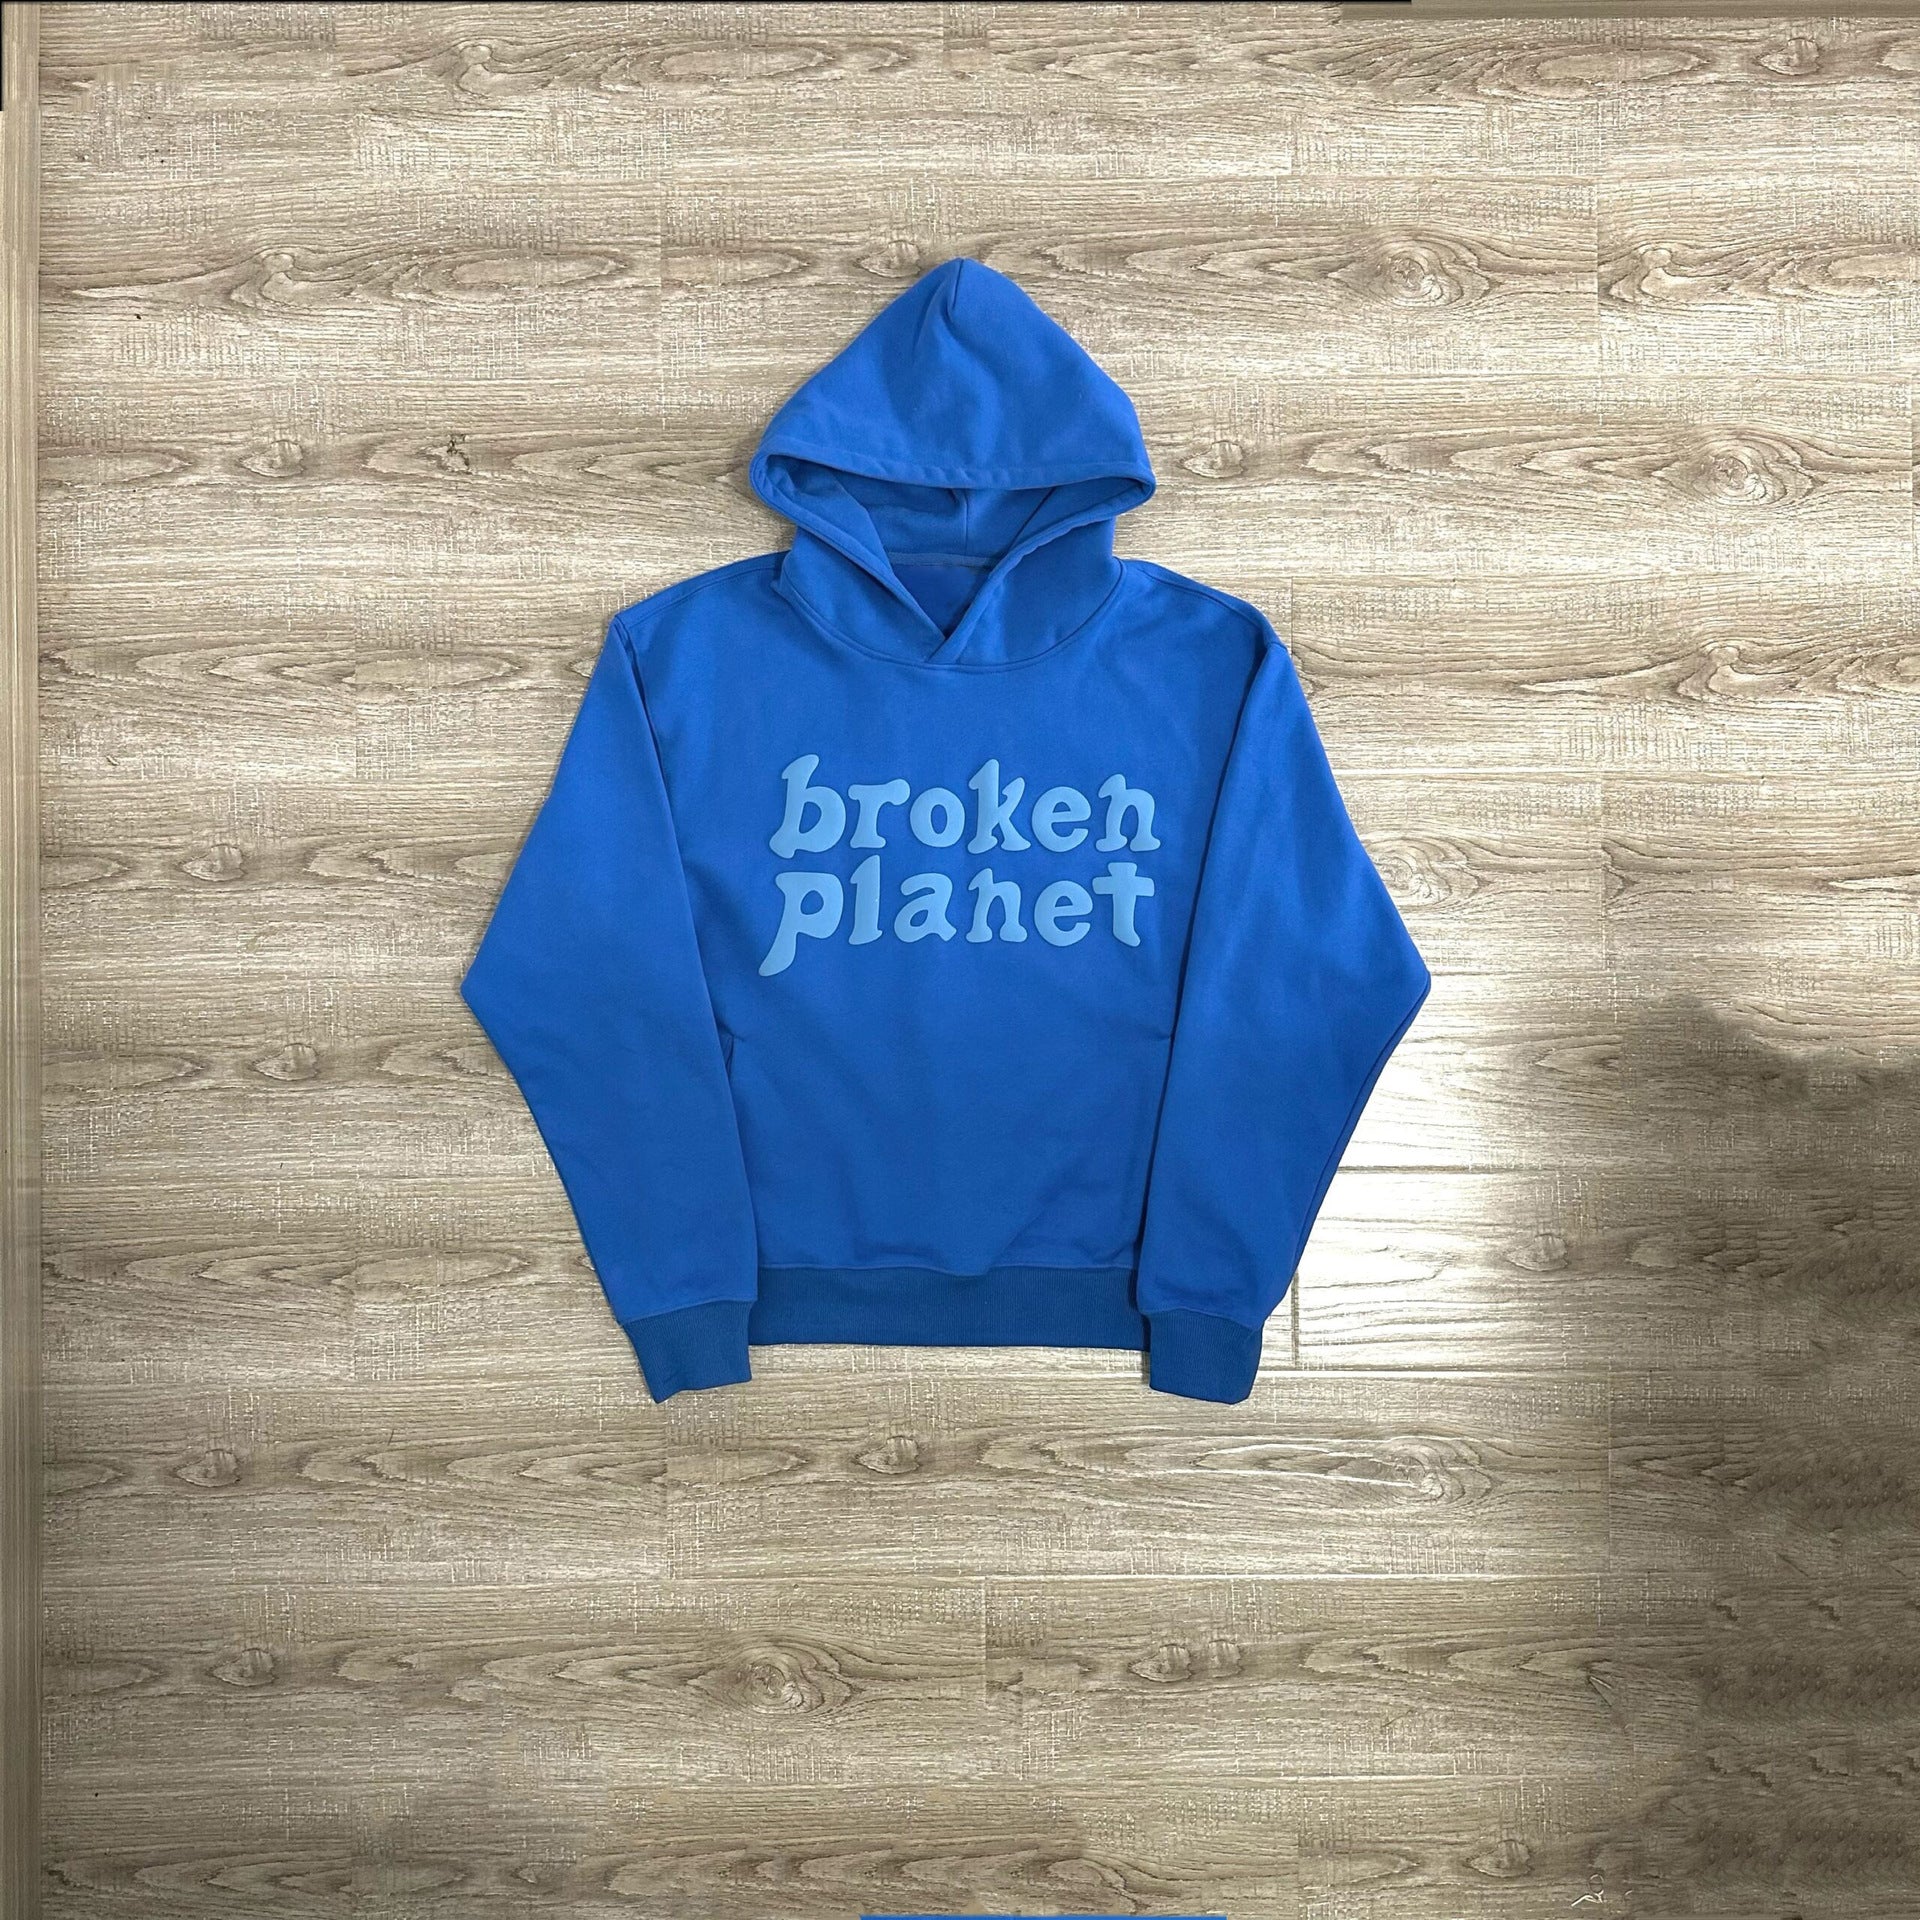 A street hipster's dream: the Maramalive™ Letter Foam Printed Hoodie Punk Rock Casual Sweater in blue polyester with the text "broken planet" on the front, laid flat on a wooden floor.